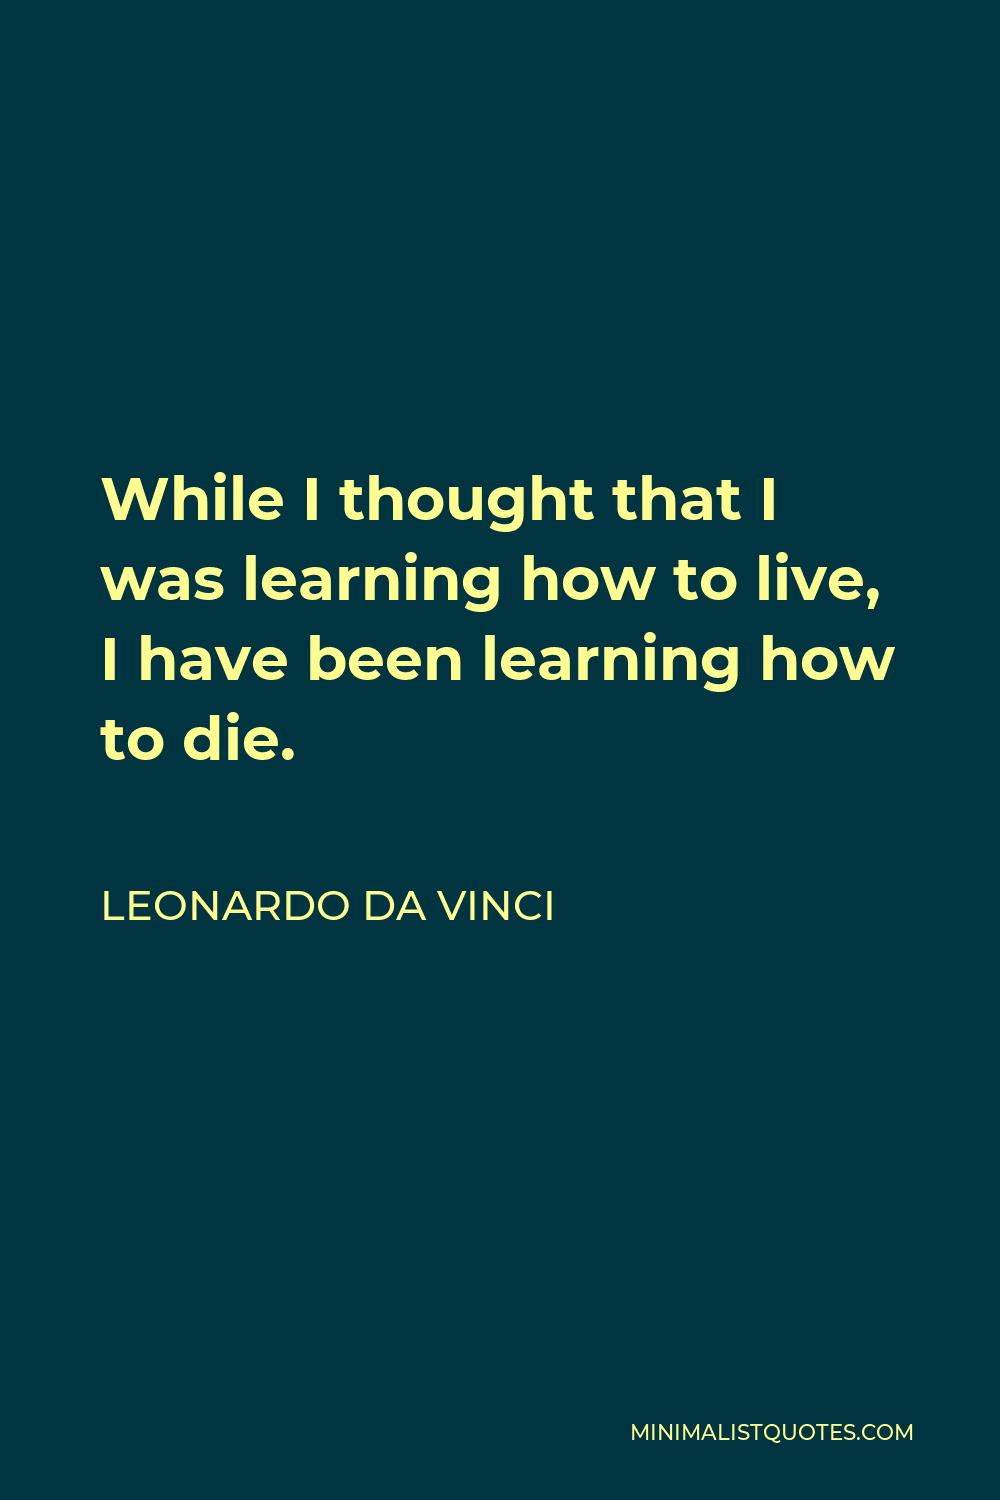 Leonardo da Vinci Quote - While I thought that I was learning how to live, I have been learning how to die.